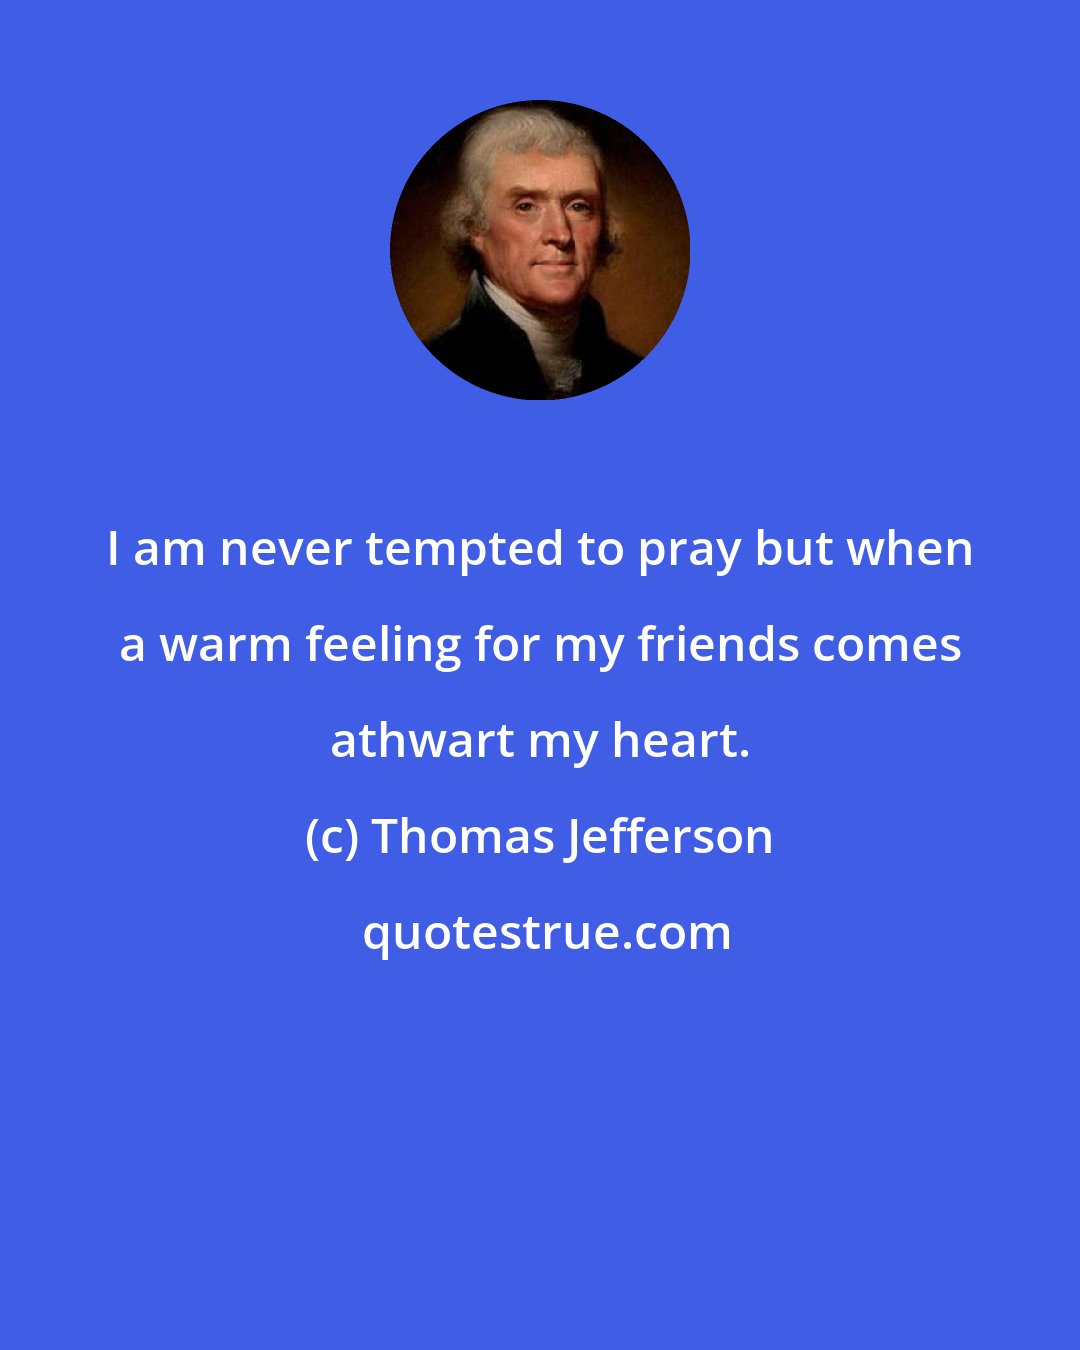 Thomas Jefferson: I am never tempted to pray but when a warm feeling for my friends comes athwart my heart.